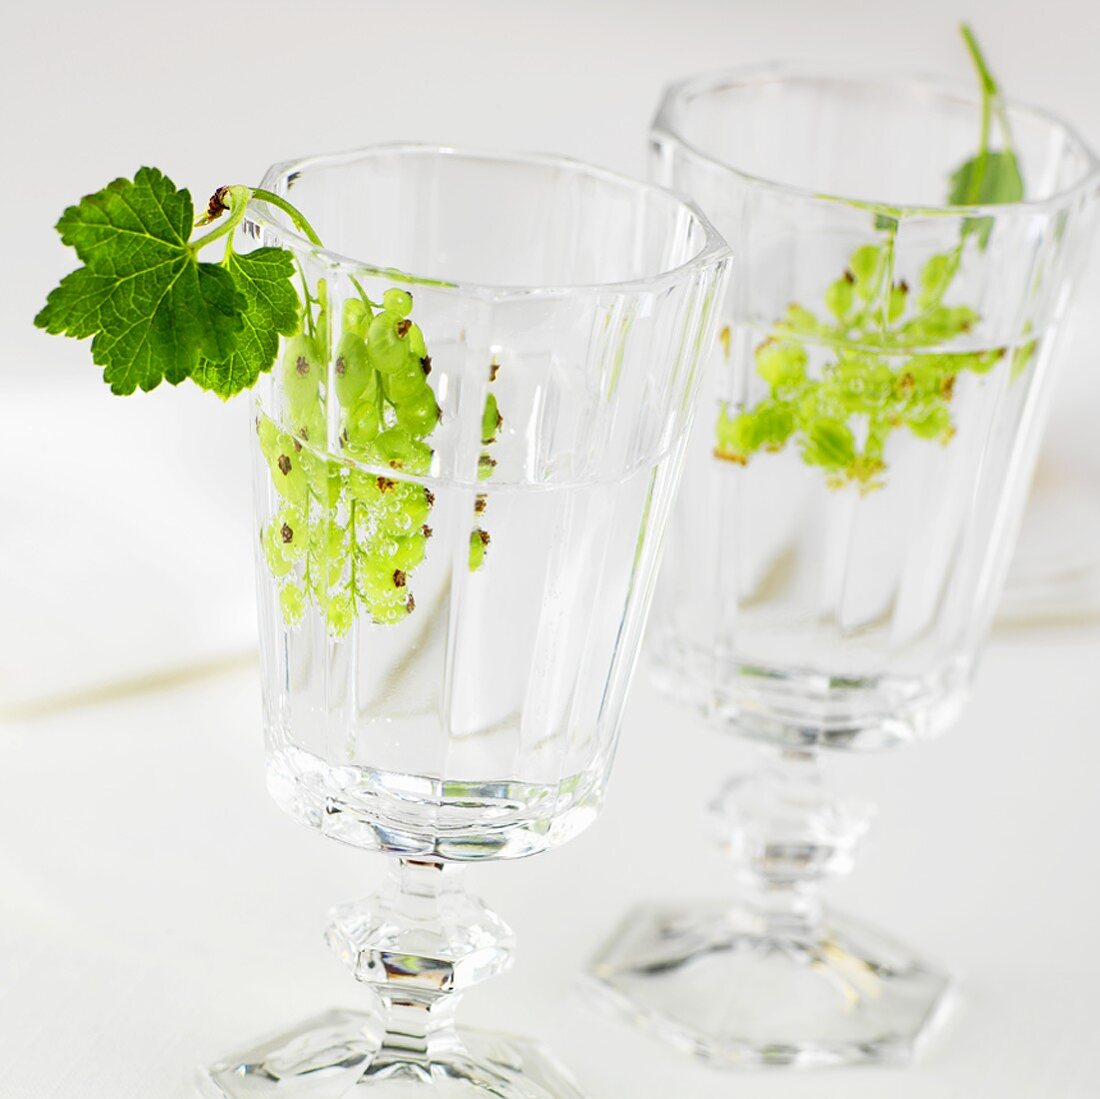 Two glasses of water with green currants